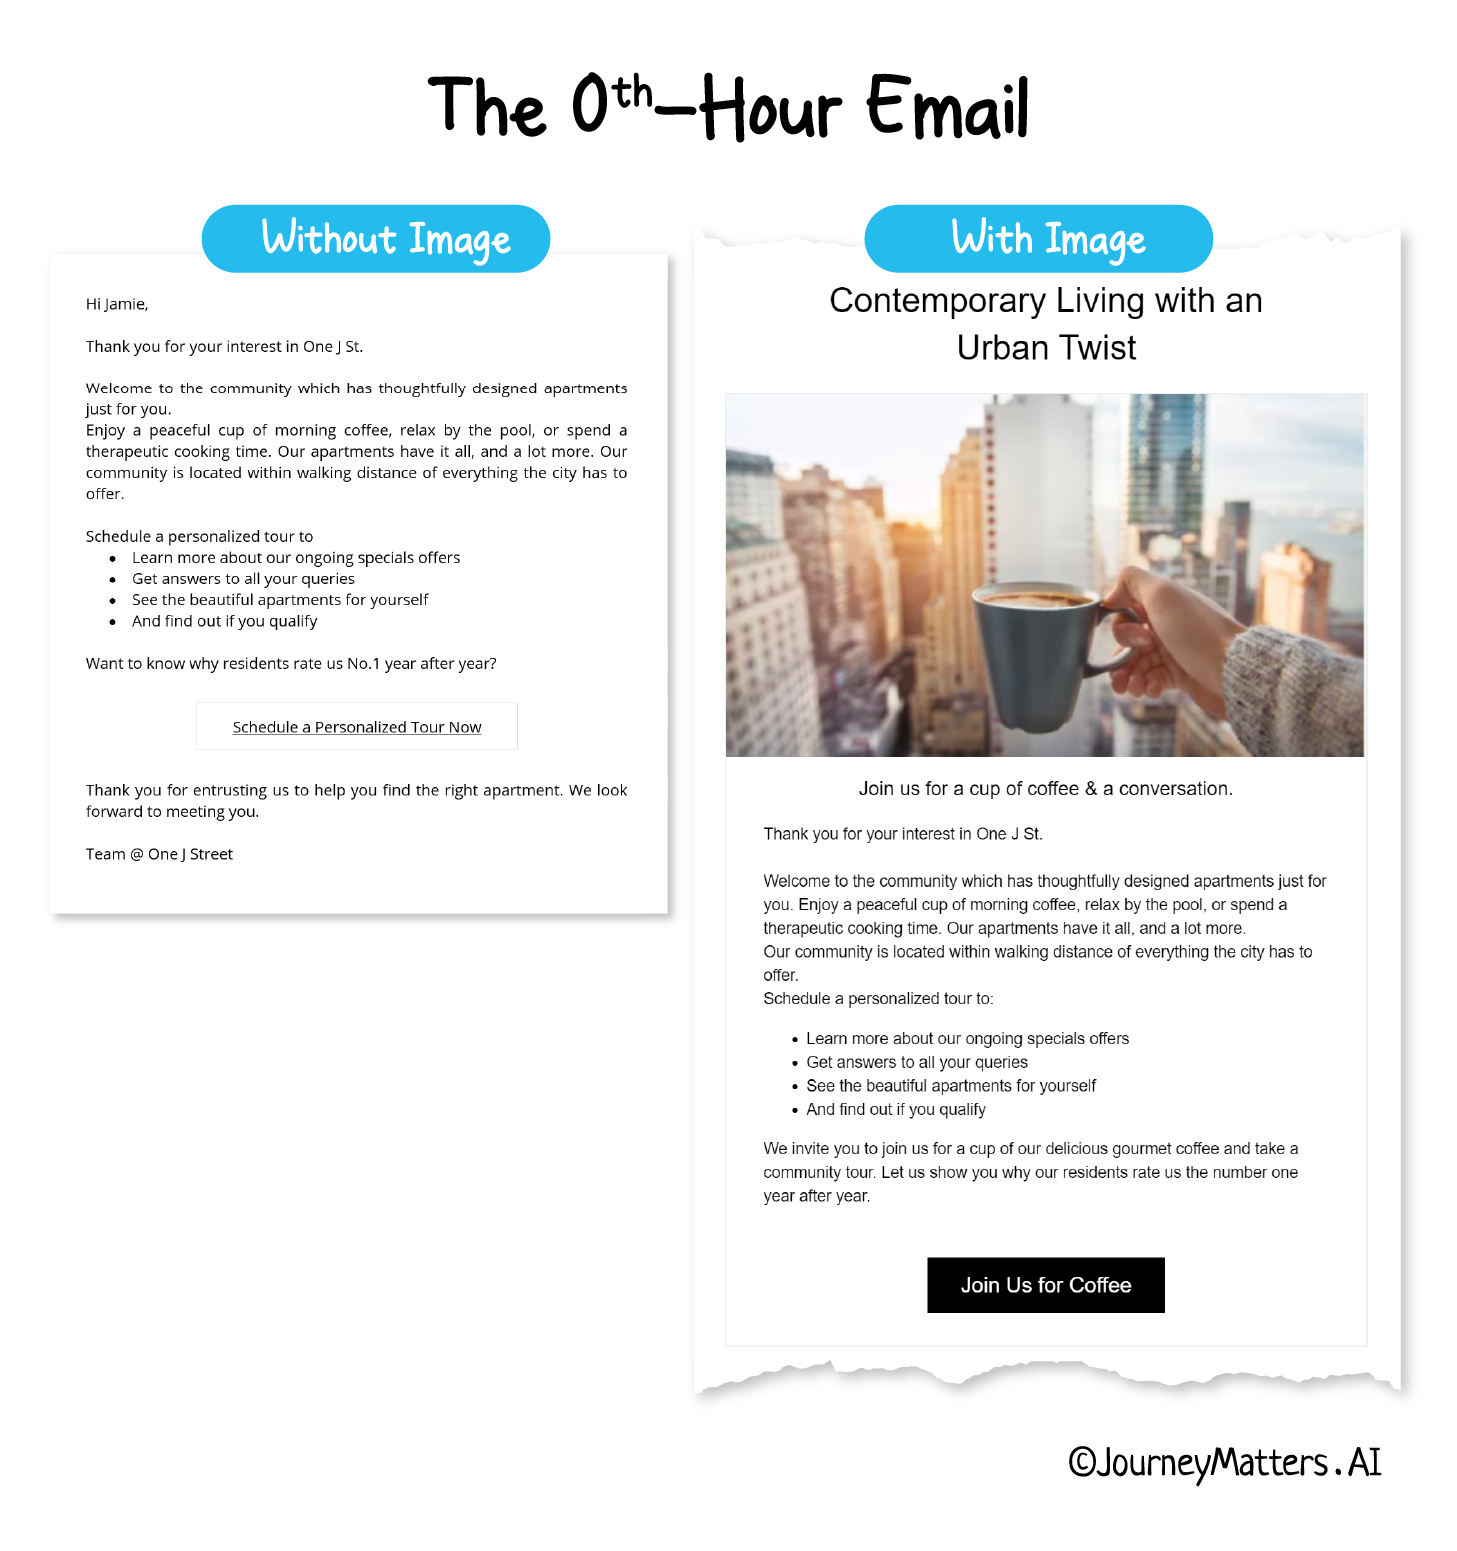 Examples of 0th-Hour emails with and without images